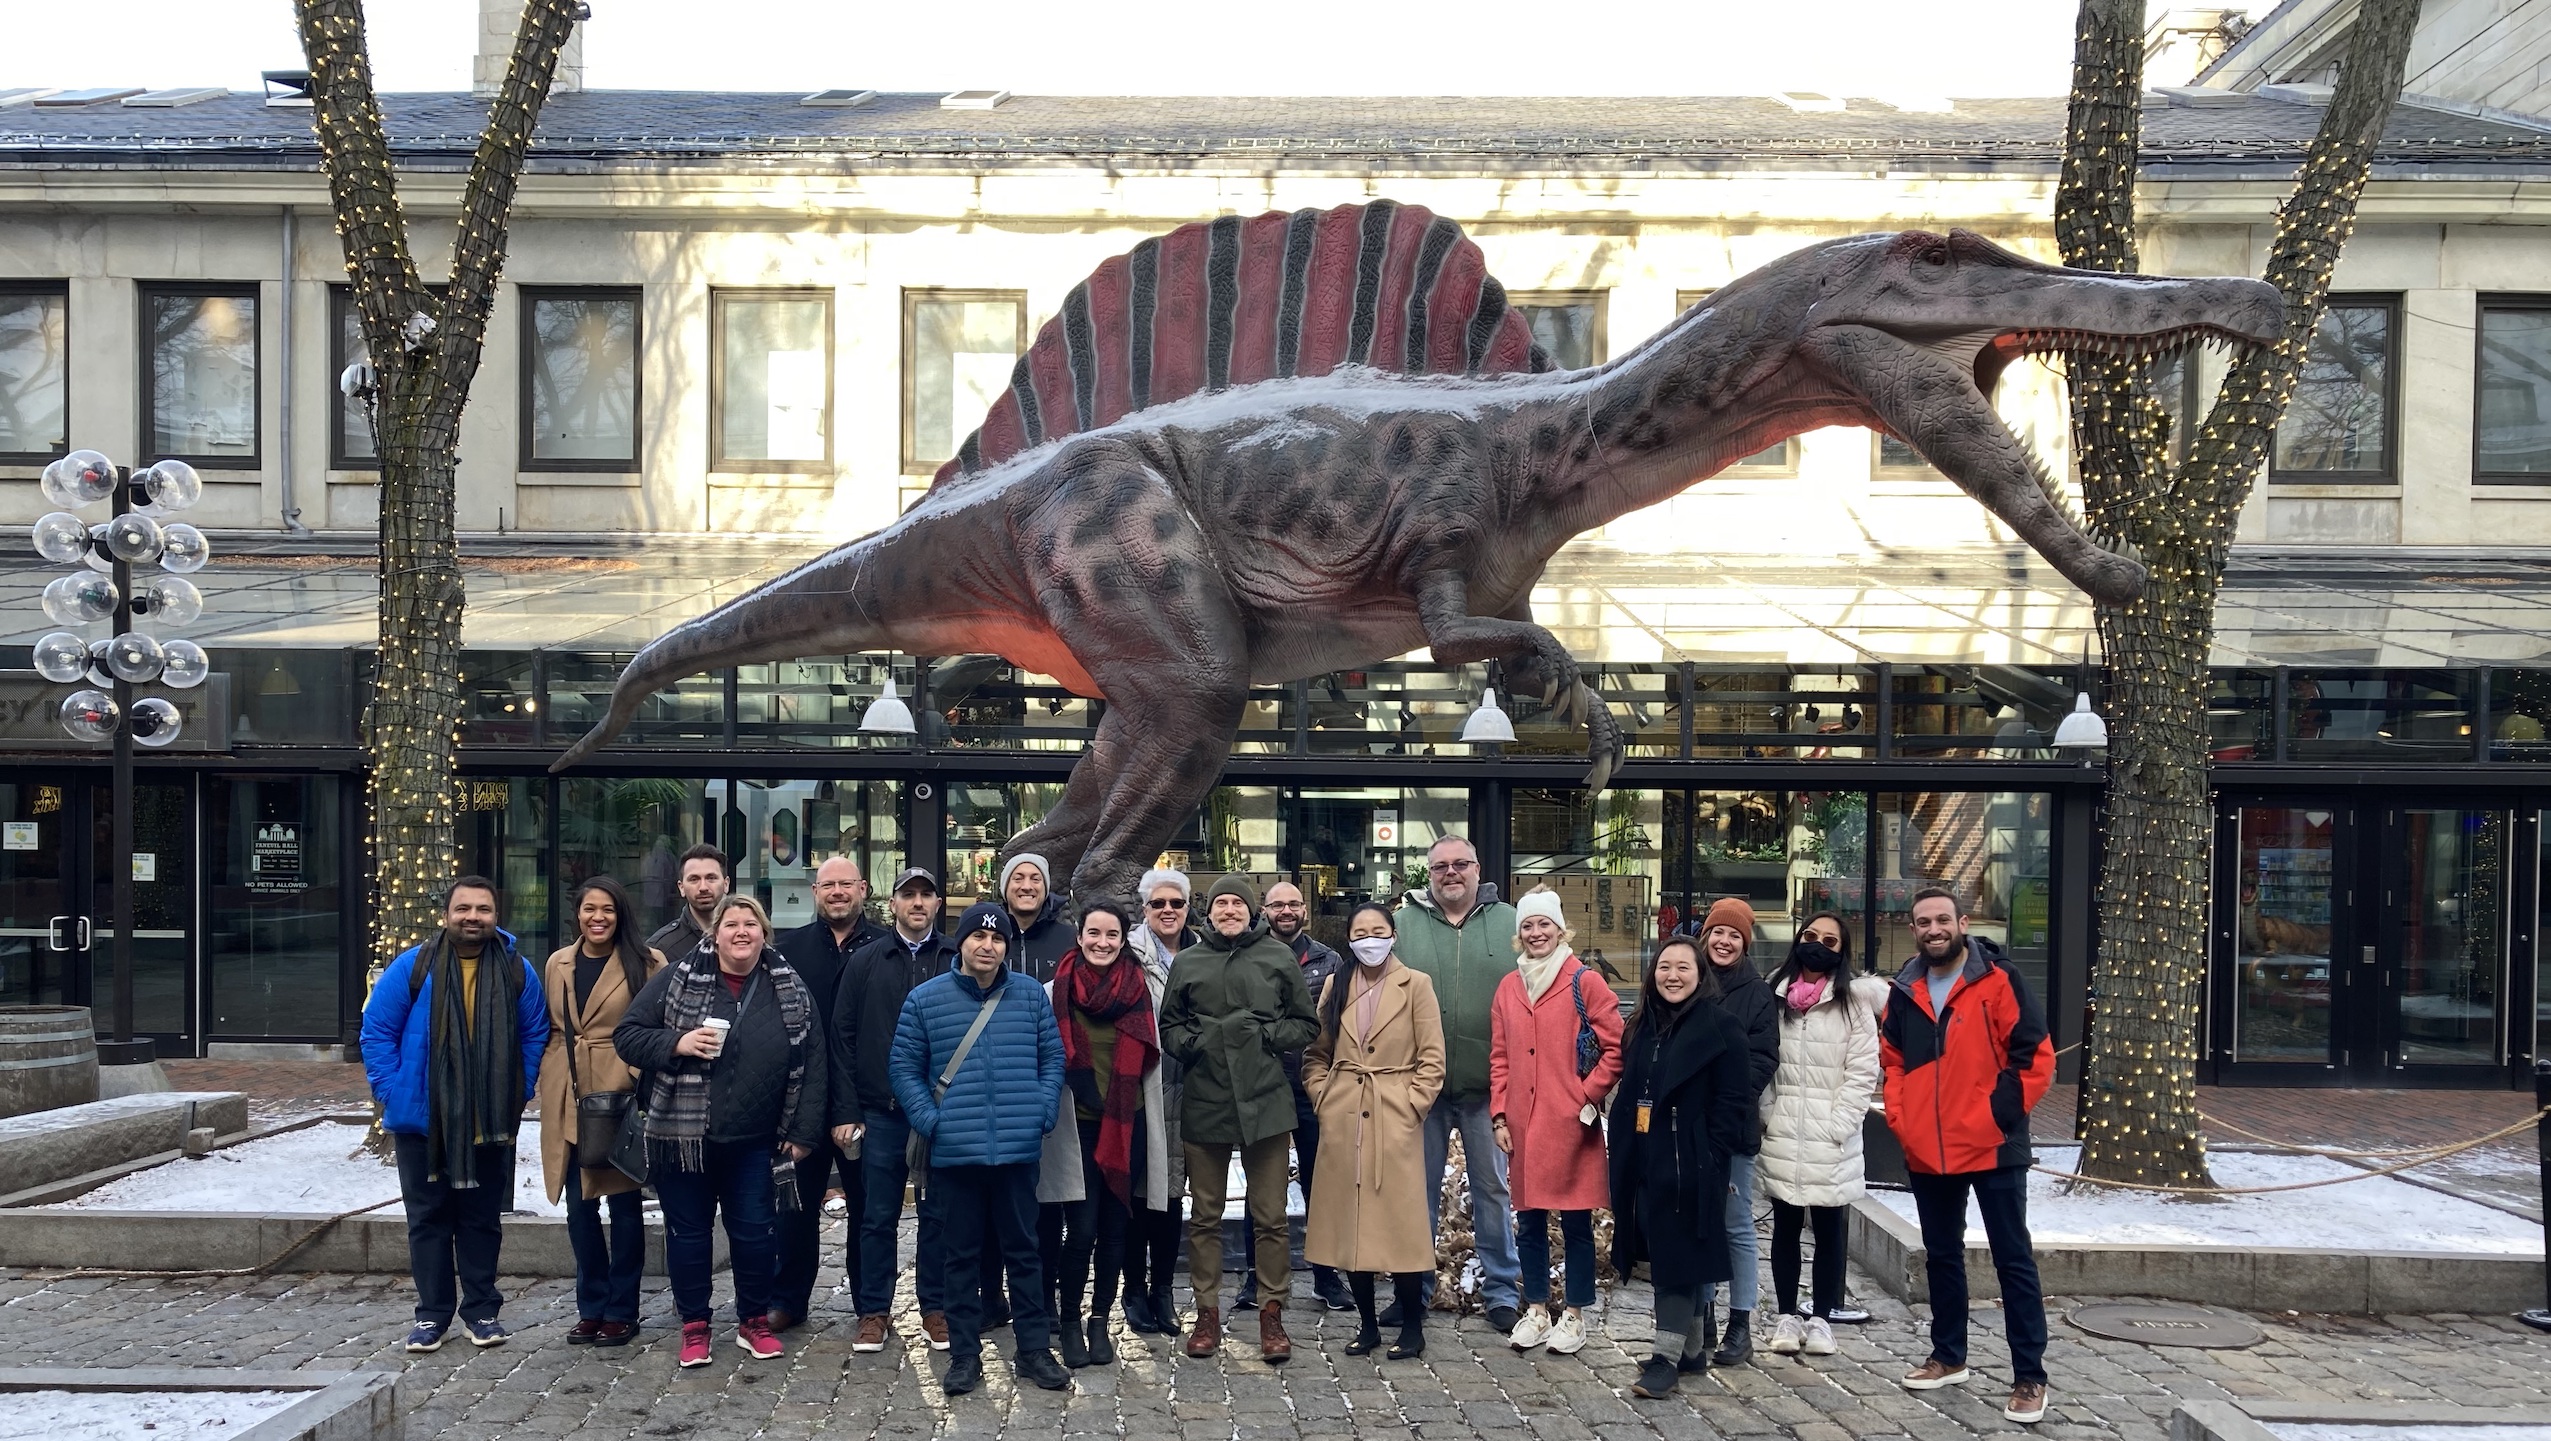 The NuvoAir team poses in front of a dinosaur statue at Faneuil Hall.